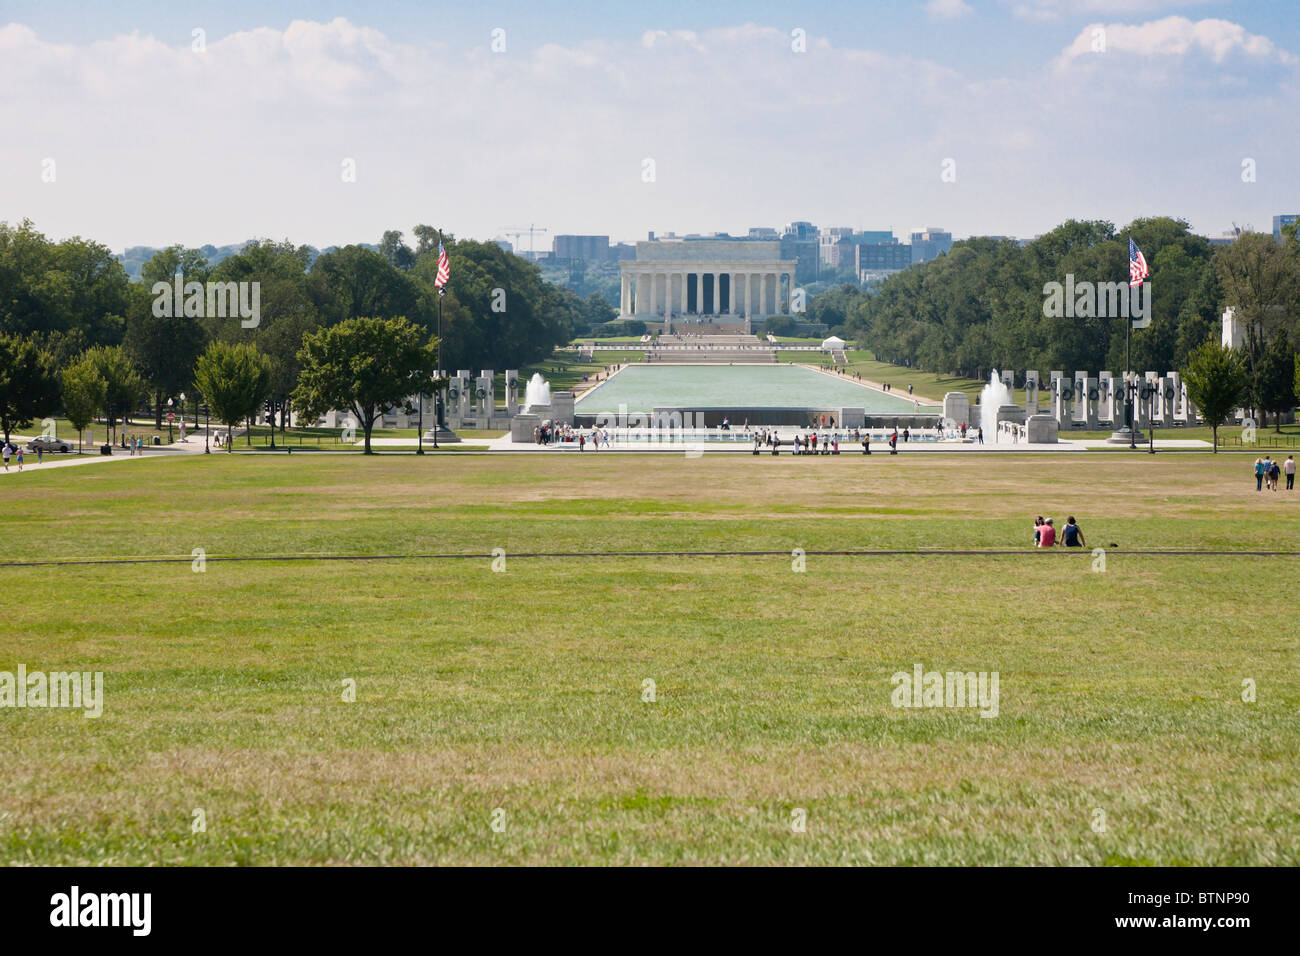 Washington DC - Sep 2009 - View of Lincoln Memorial across the National Mall from the Washington Monument in Washington DC Stock Photo